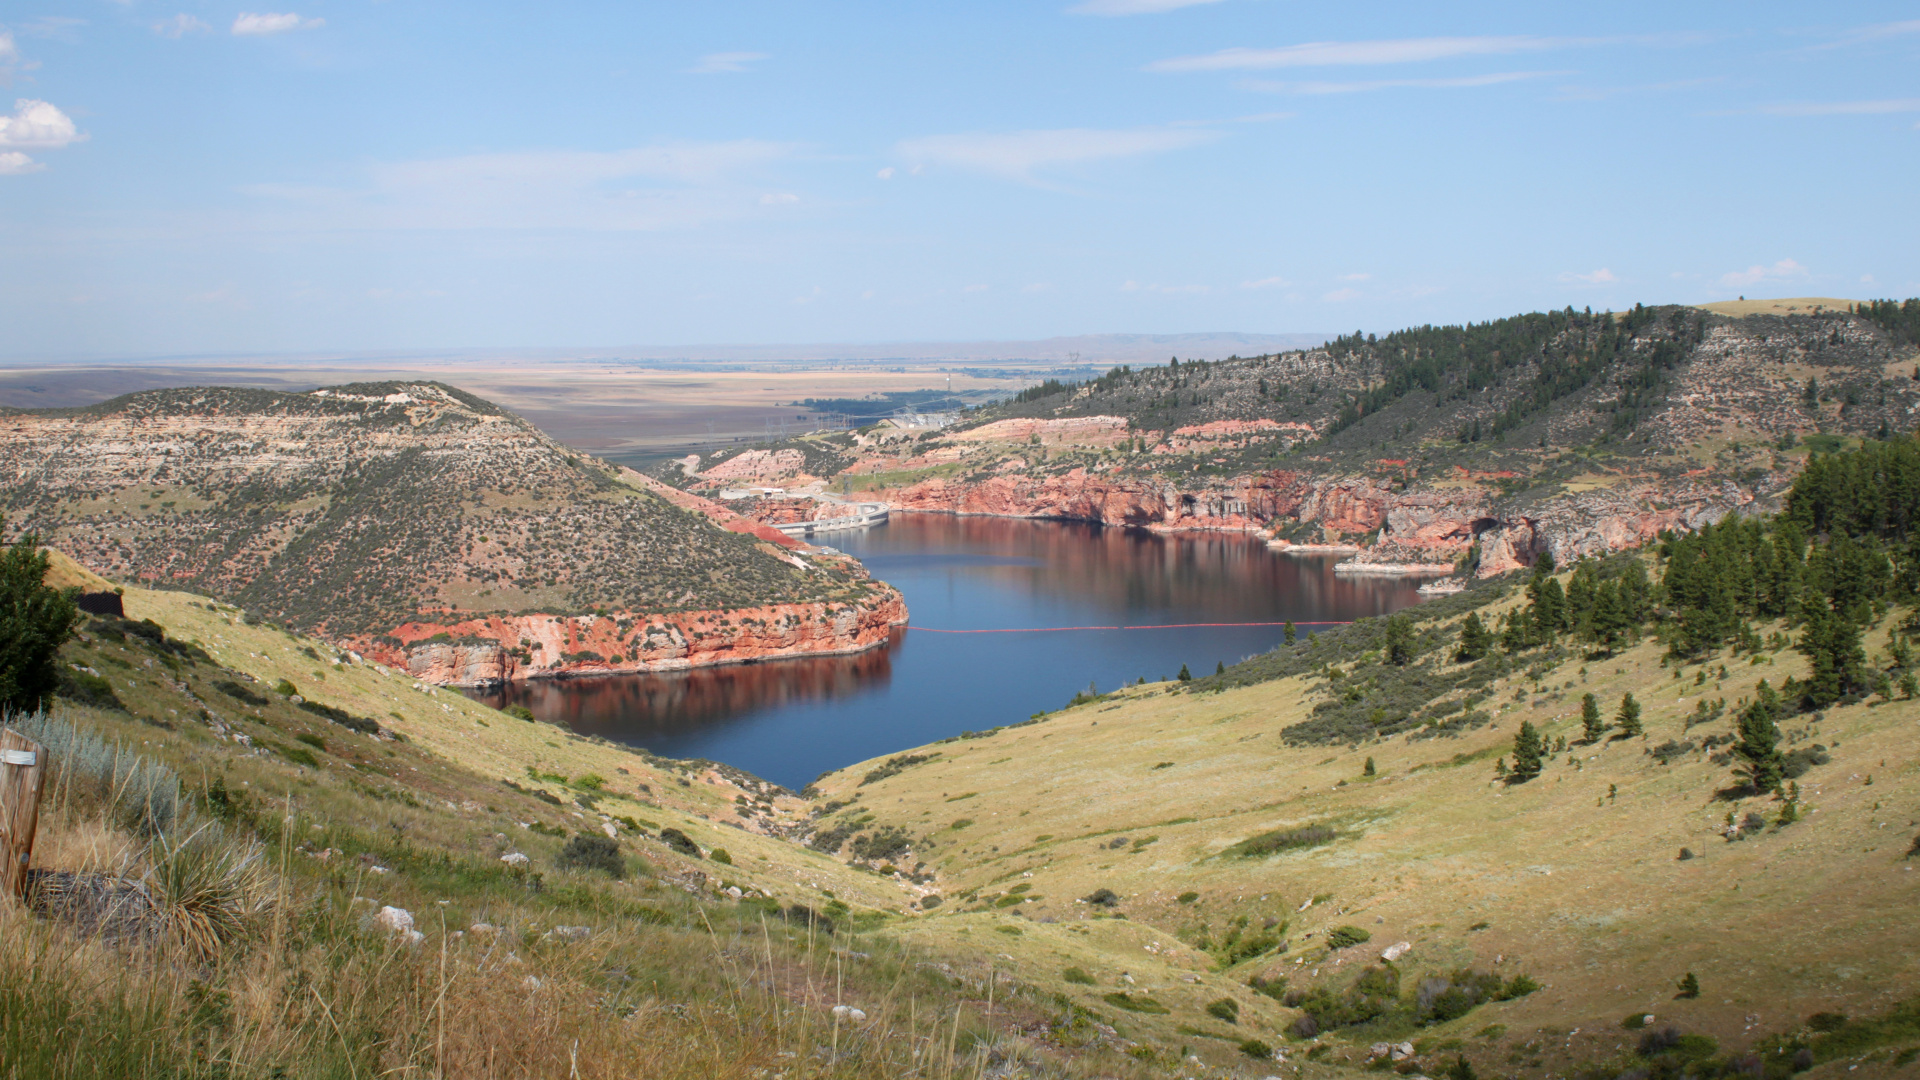 Yellowtail Dam (Travels » US Trip 3: The Roads Not Taken » The Country » Crow Reservation » Bighorn Canyon Recreation Area)